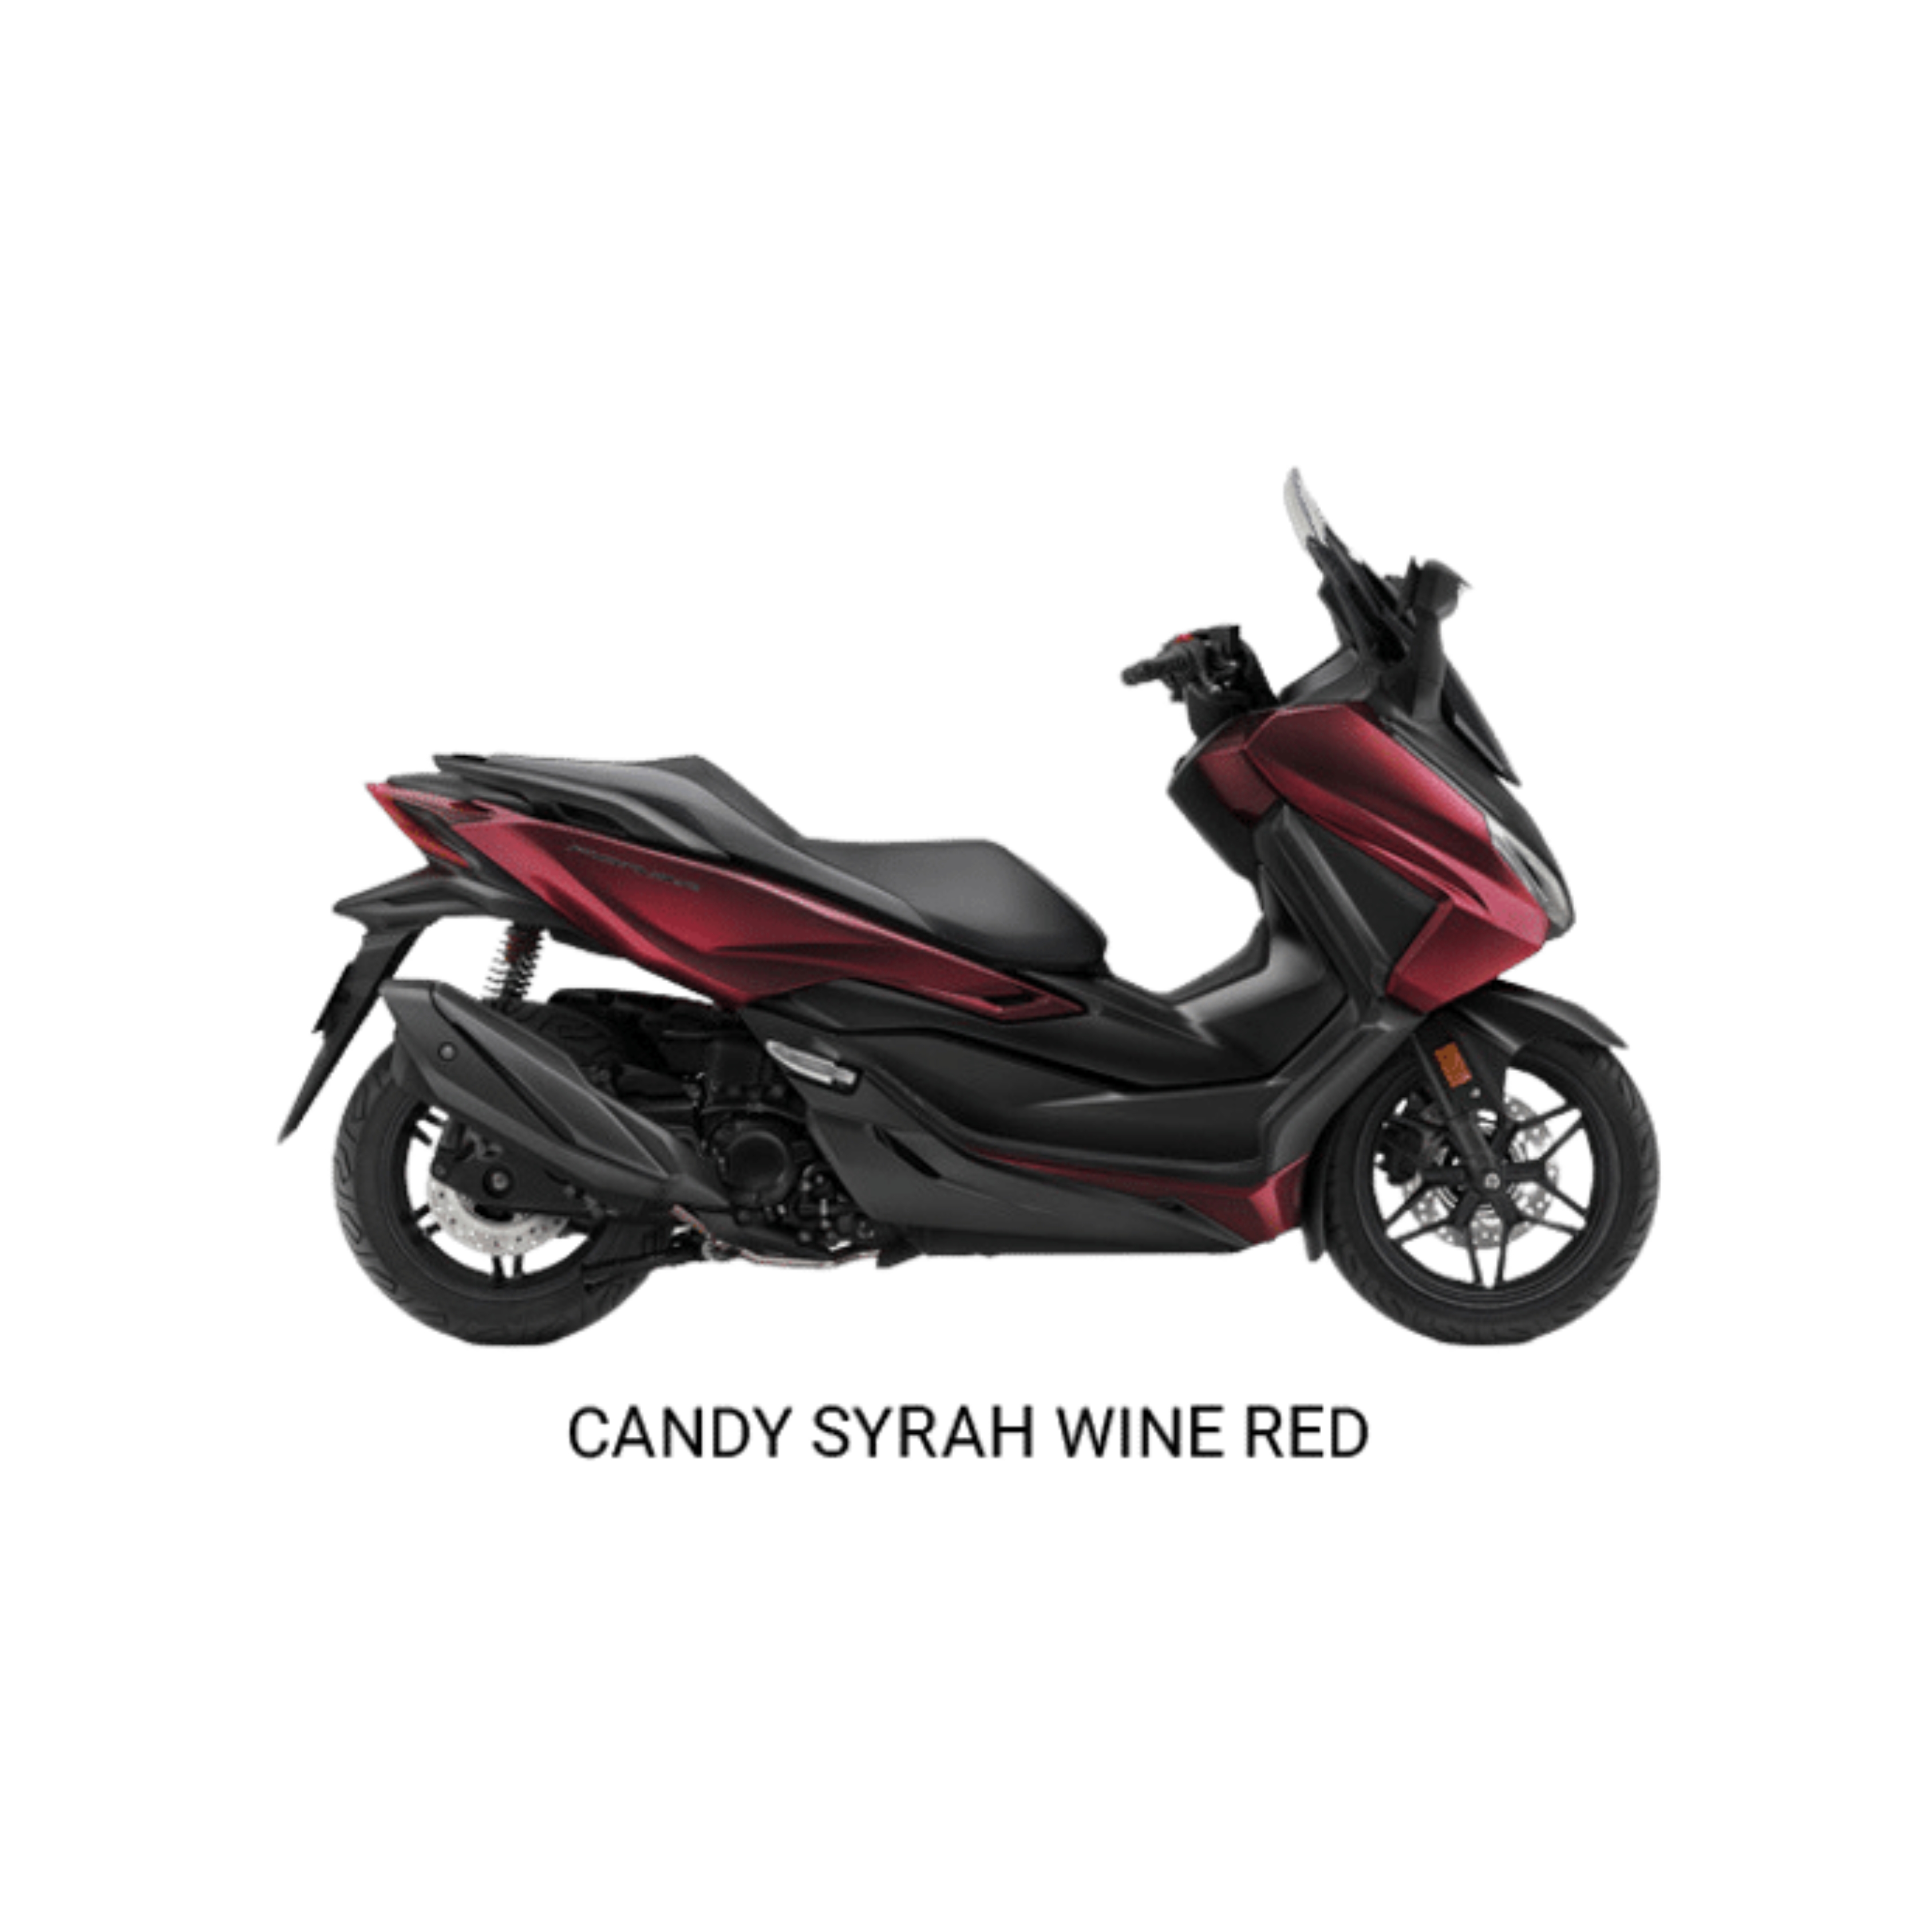 Candy Syrah Wine Red